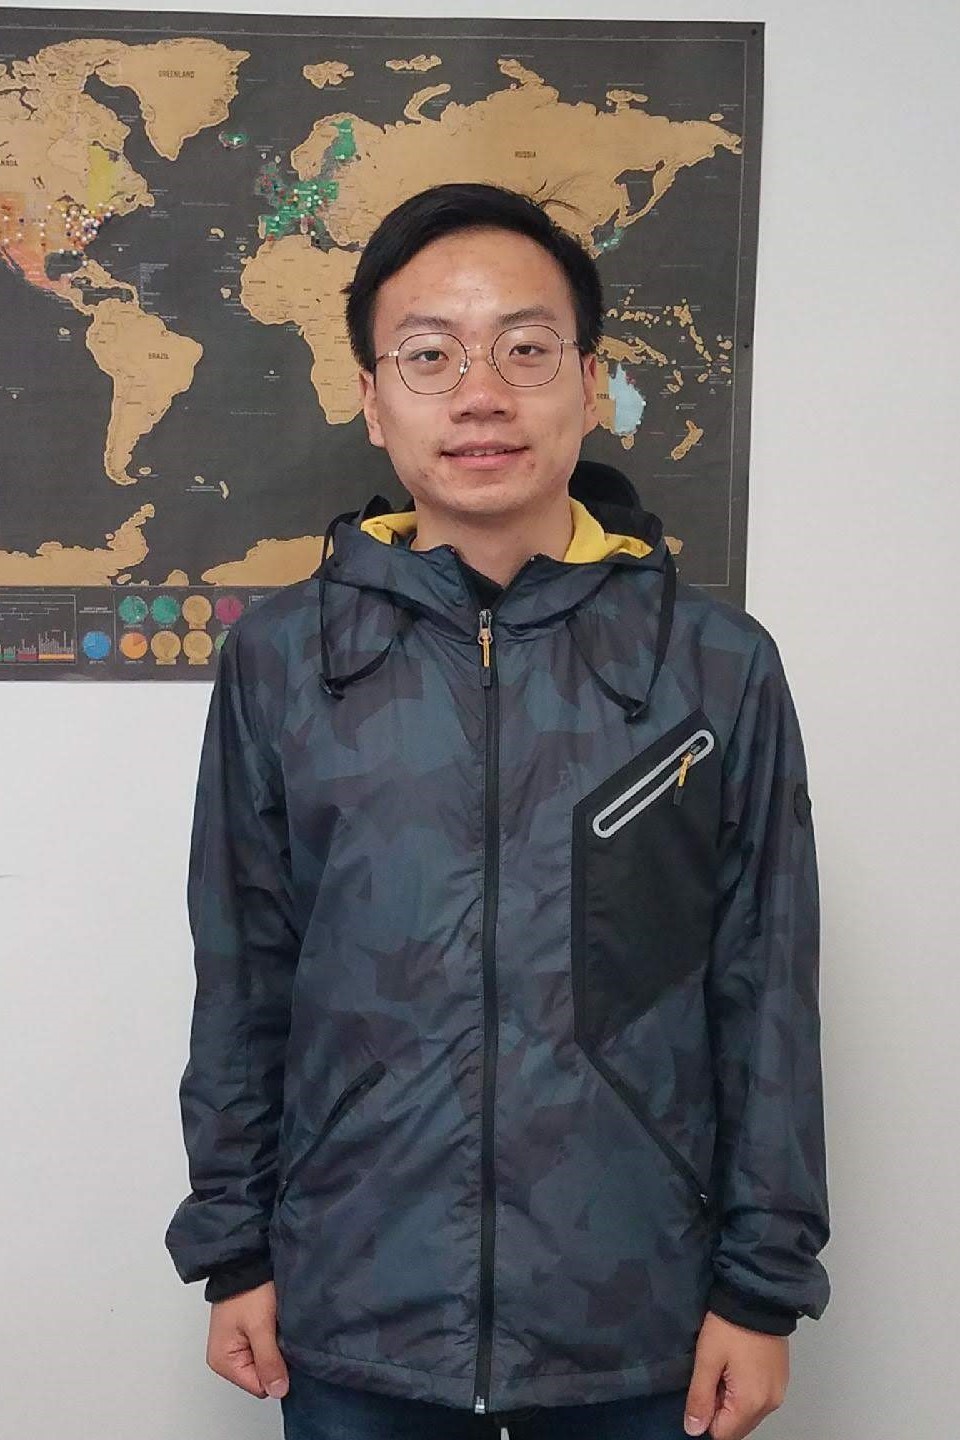 Dr. Guanyu Lu joined the Mechanical Engineering Department at Vanderbilt University and the Caldwell Lab in Fall 2018. He comes to us from Xi'an Jiaotong University in China, where he majored in Energy and Power Engineering.